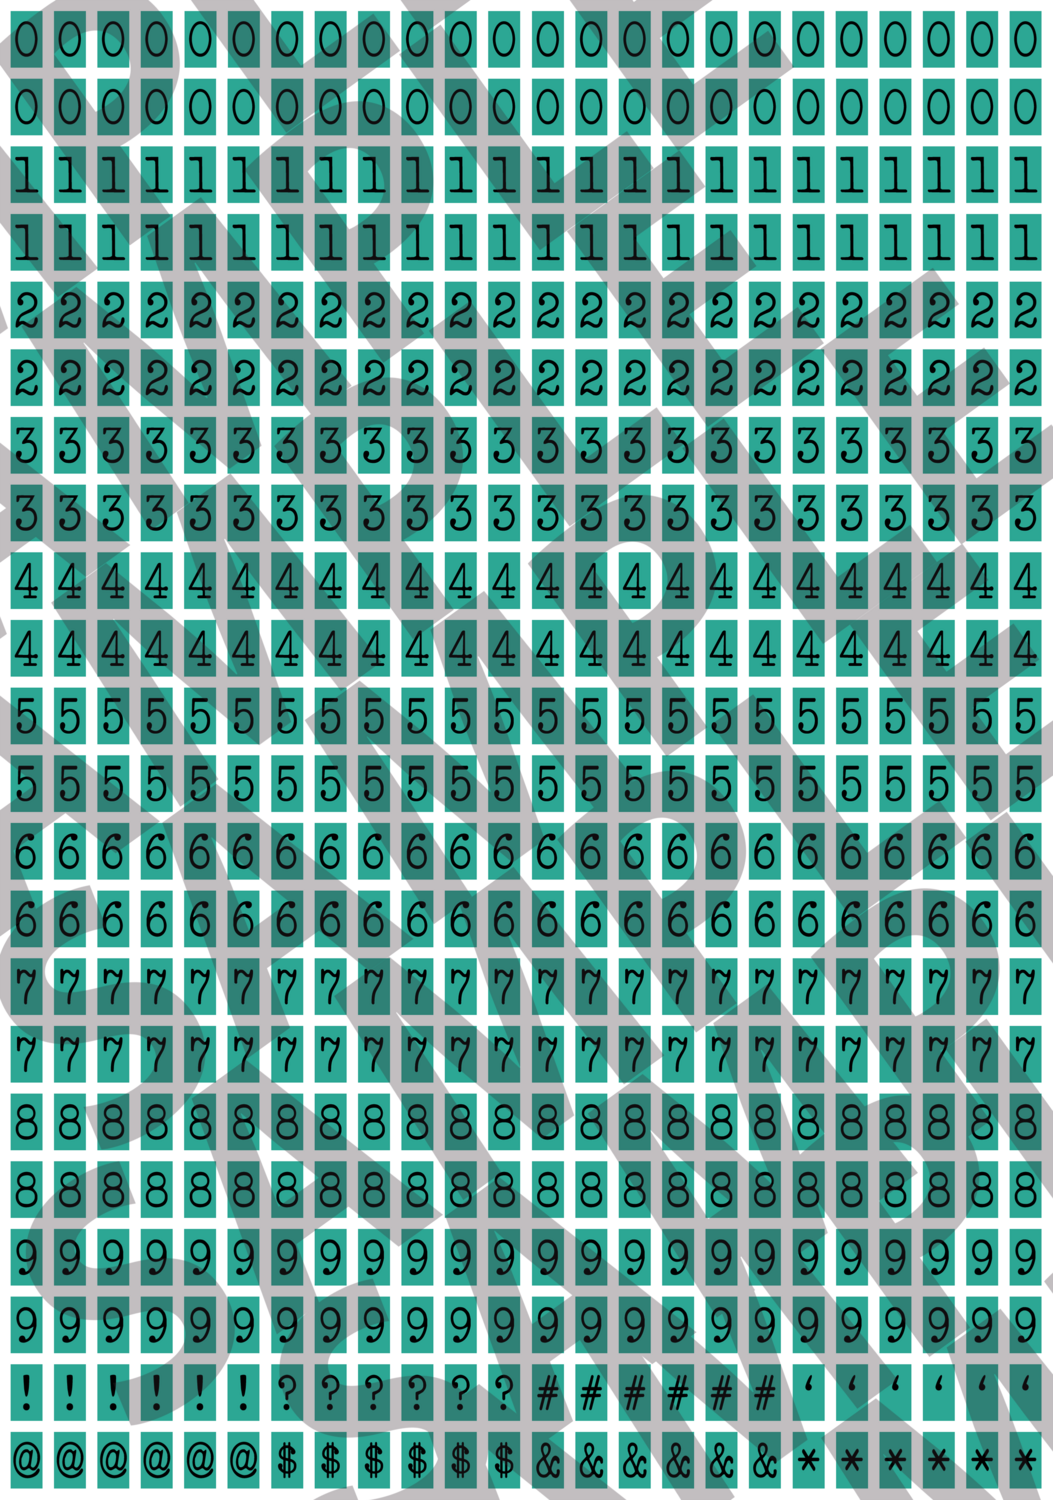 Black Text Turquoise 2 - 'Typewriter' Tiny Numbers